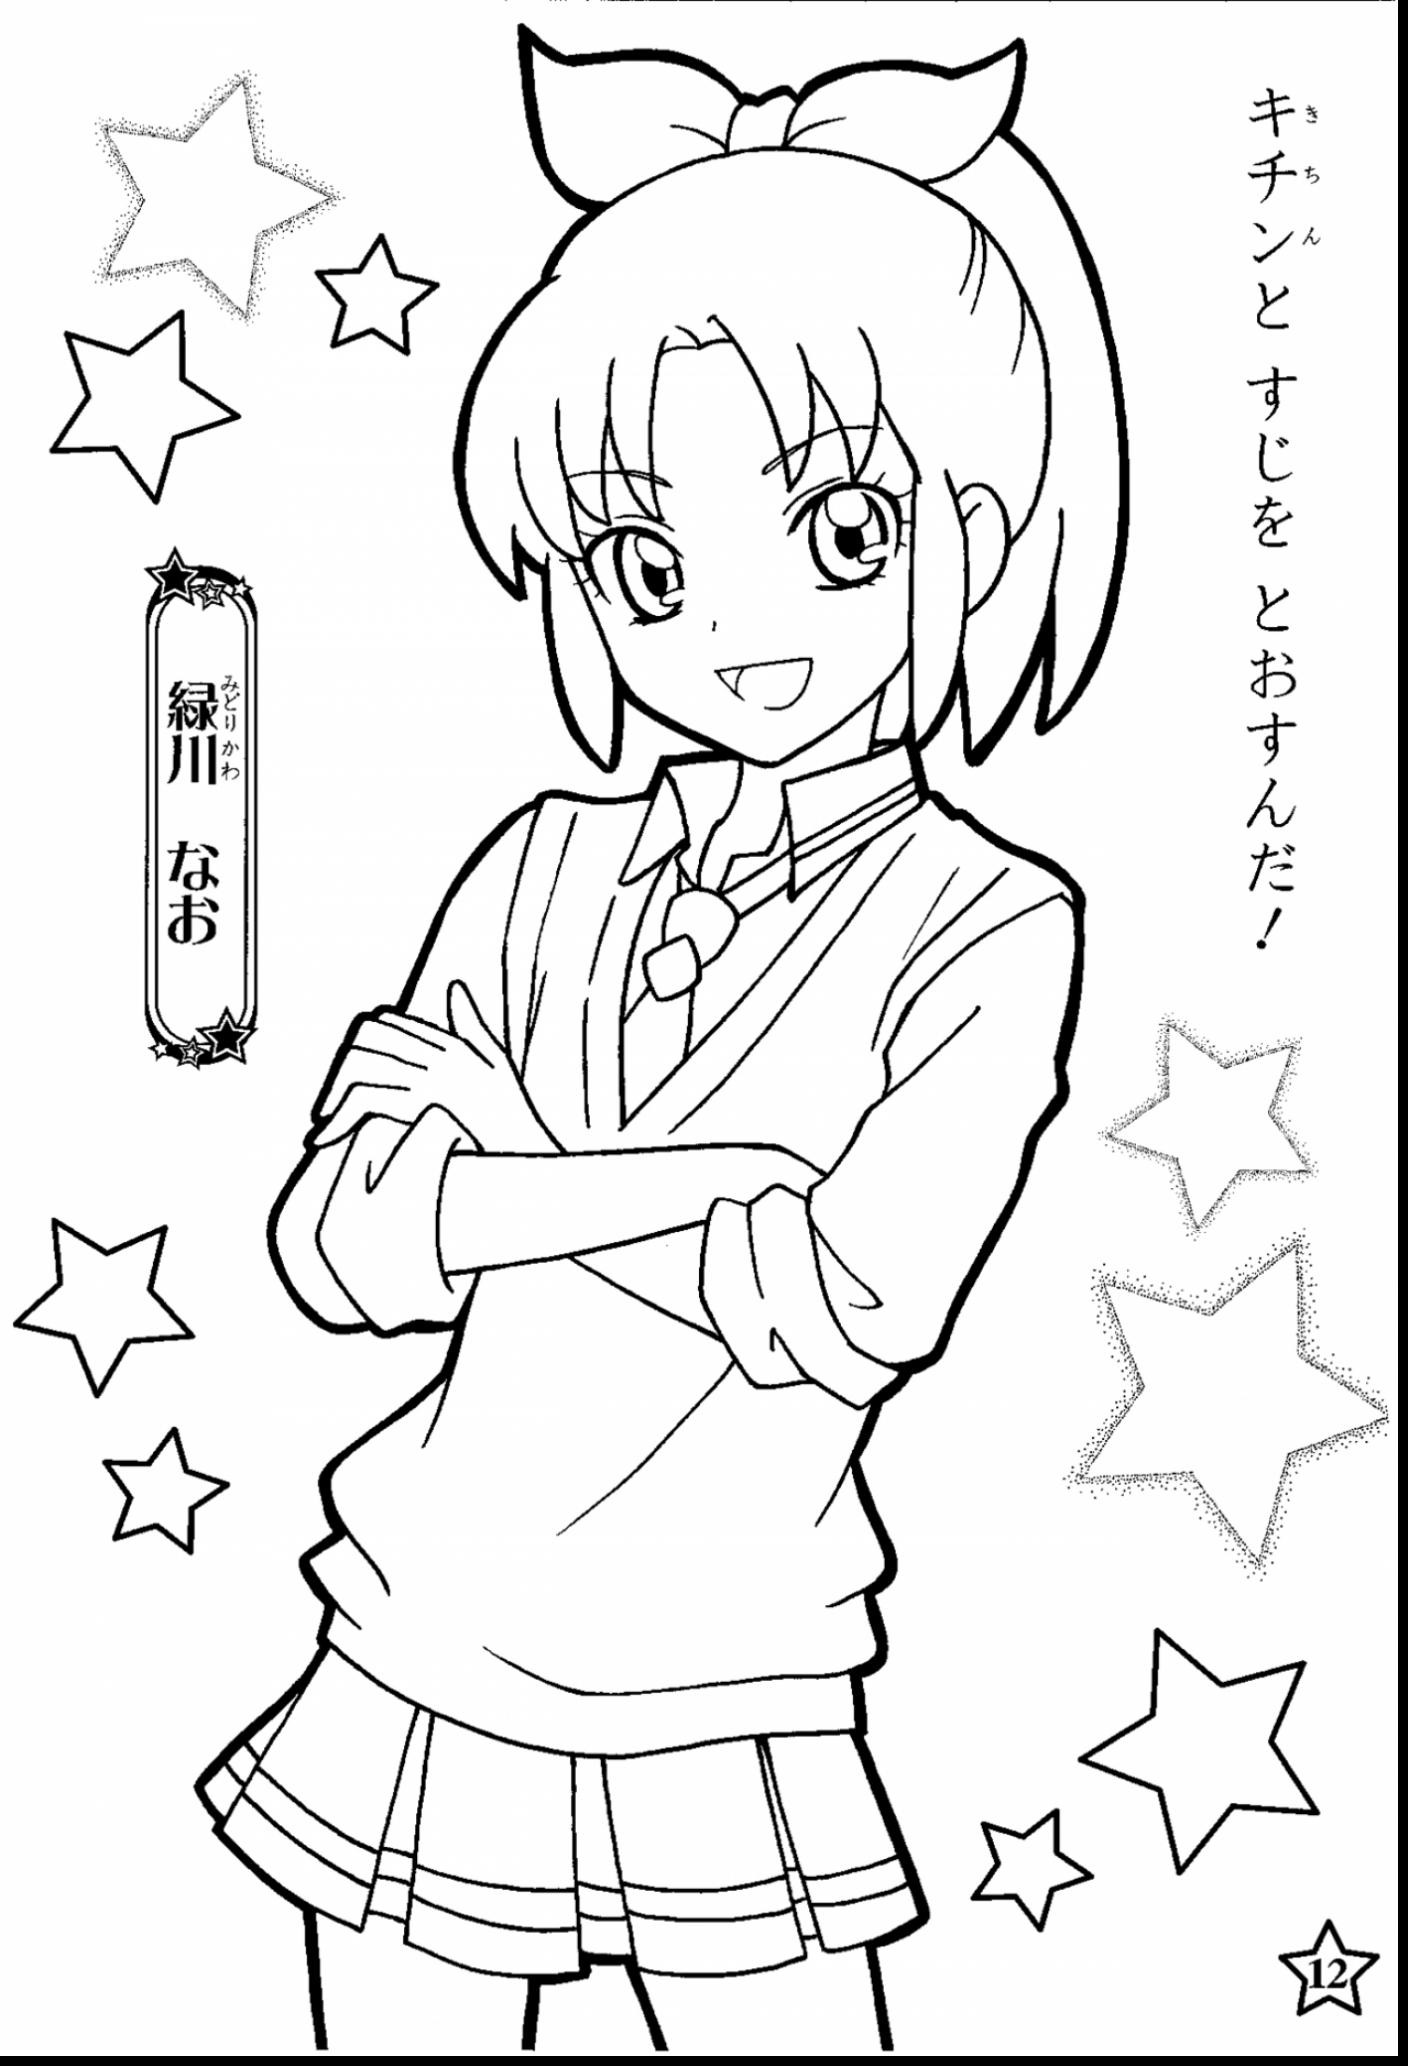 Anime Coloring Pages For Girls
 Cute Anime Girl Coloring Pages to Print